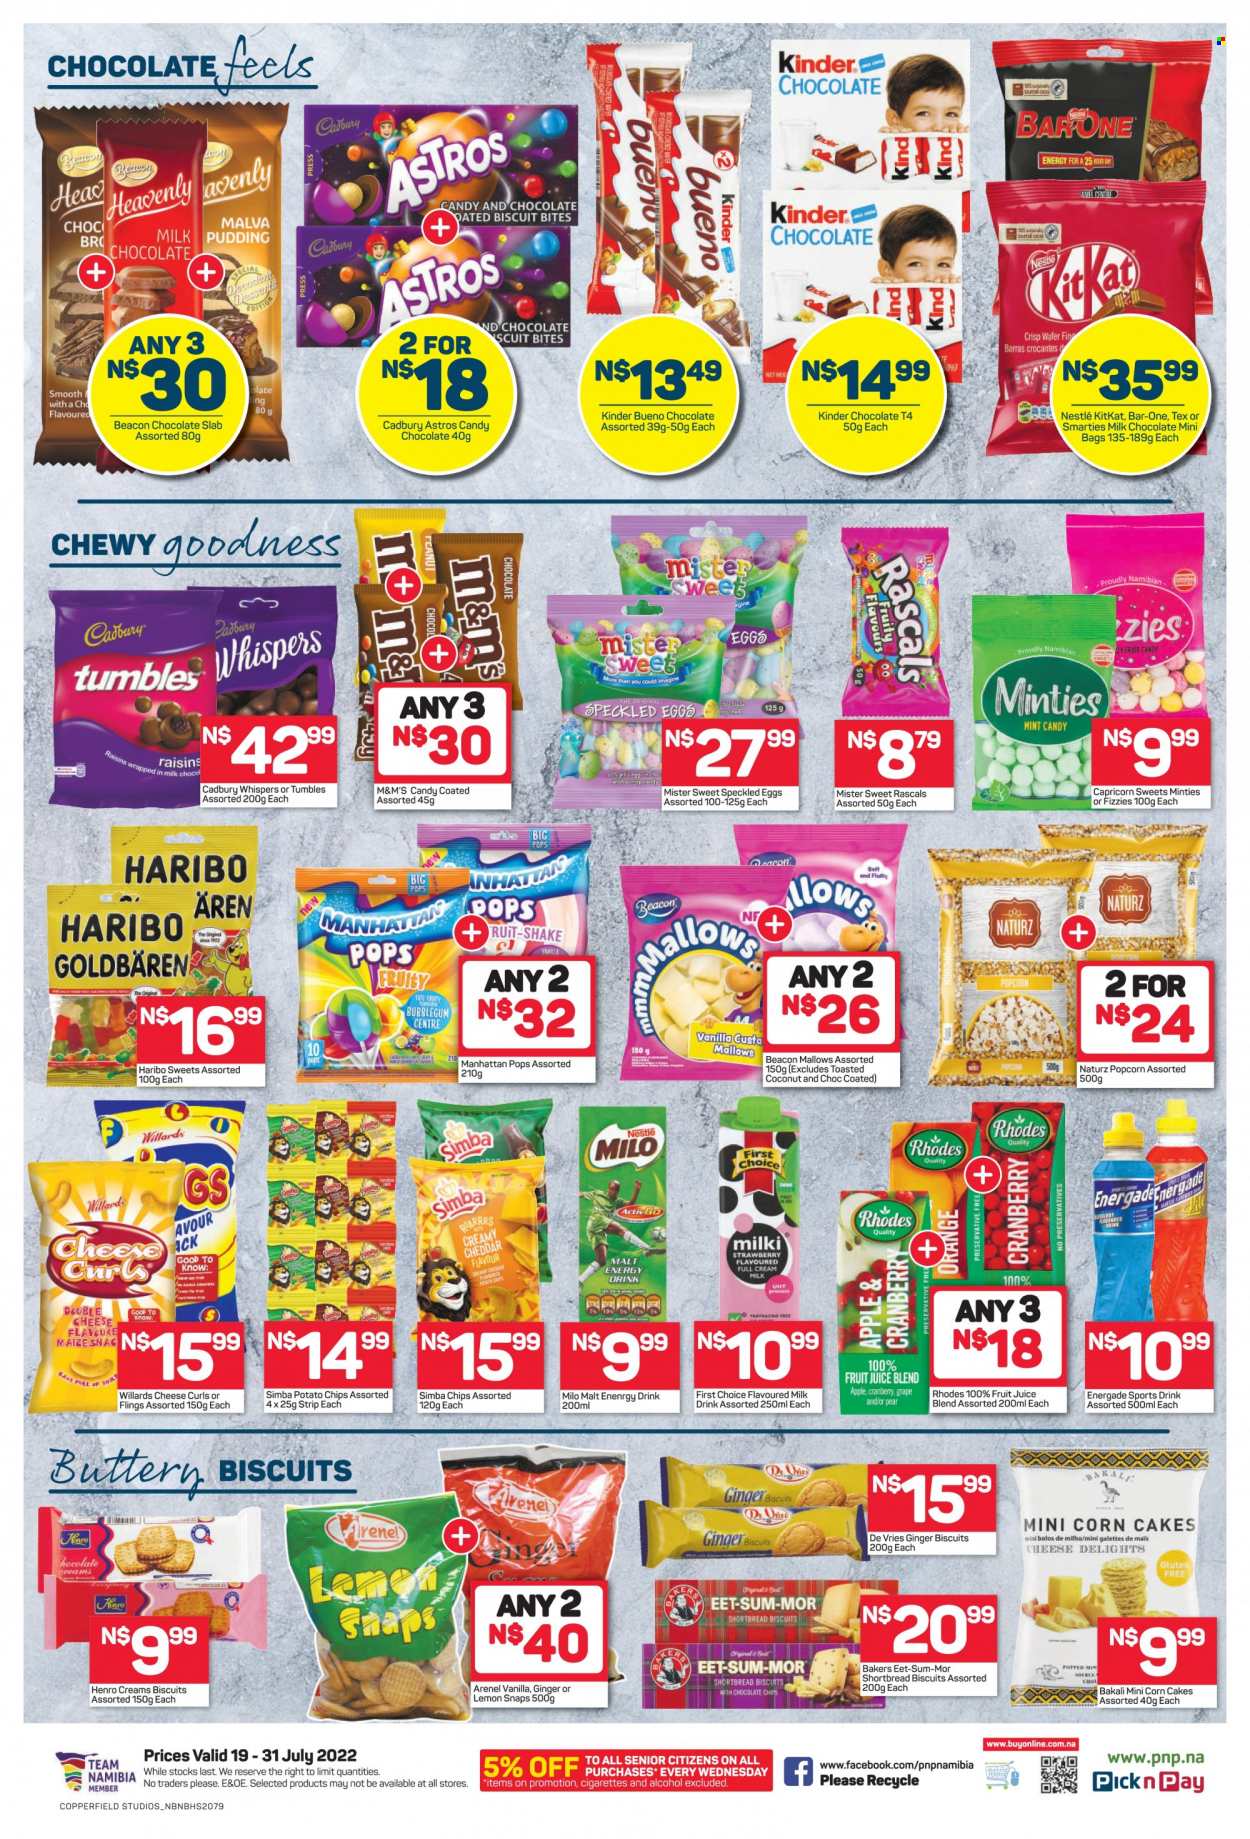 Pick n Pay catalogue  - 19/07/2022 - 31/07/2022 - Sales products - corn, pears, orange, cheese, pudding, flavoured milk, Milo, shakes, eggs, marshmallows, milk chocolate, Nestlé, wafers, Haribo, KitKat, jelly, bubblegum, tumbles, M&M's, Smarties, Kinder Bueno, biscuit, Cadbury, potato chips, Simba, popcorn, raisins, dried fruit, energy drink, fruit juice, juice, alcohol, Bakers. Page 2.